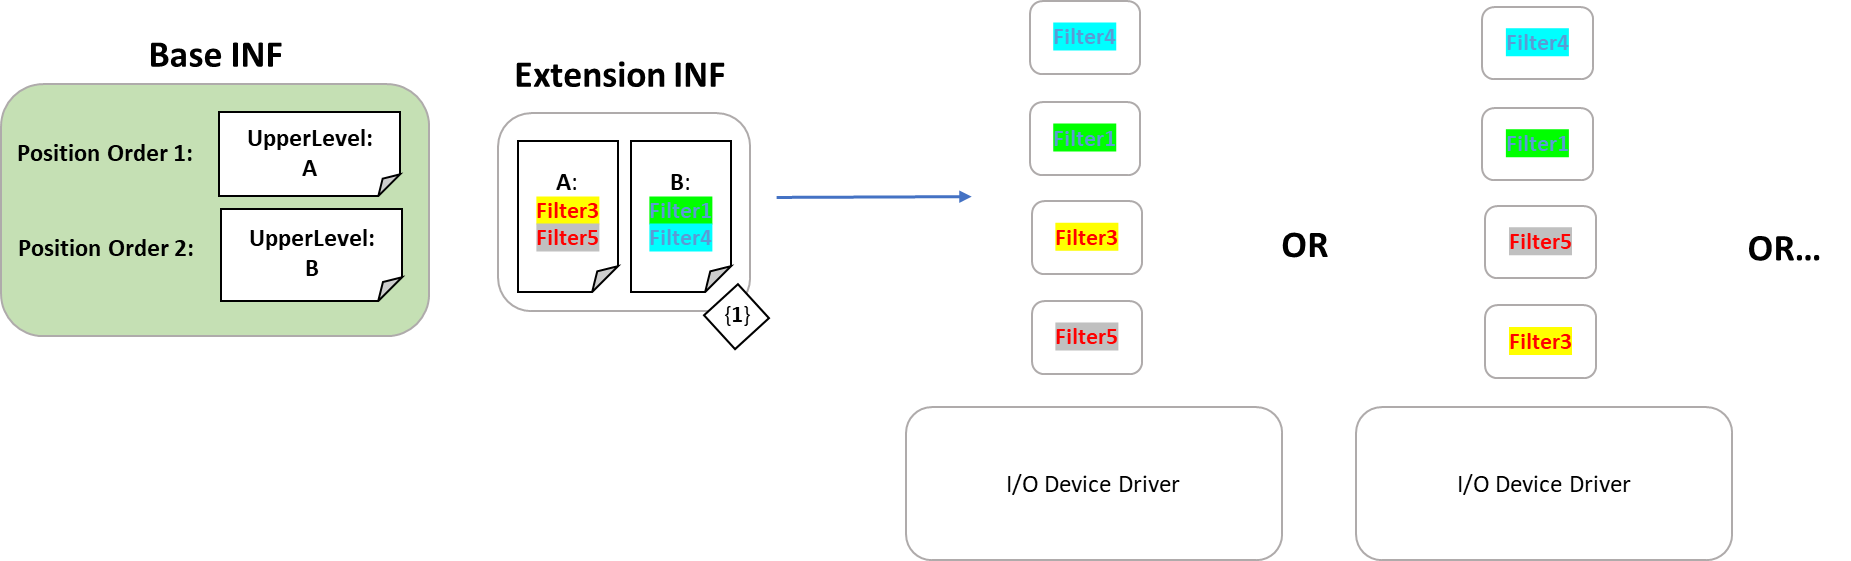 Installation of device drivers shown as a device stack order that merges the lists of filter drivers while respecting the desired positioning and ordering.